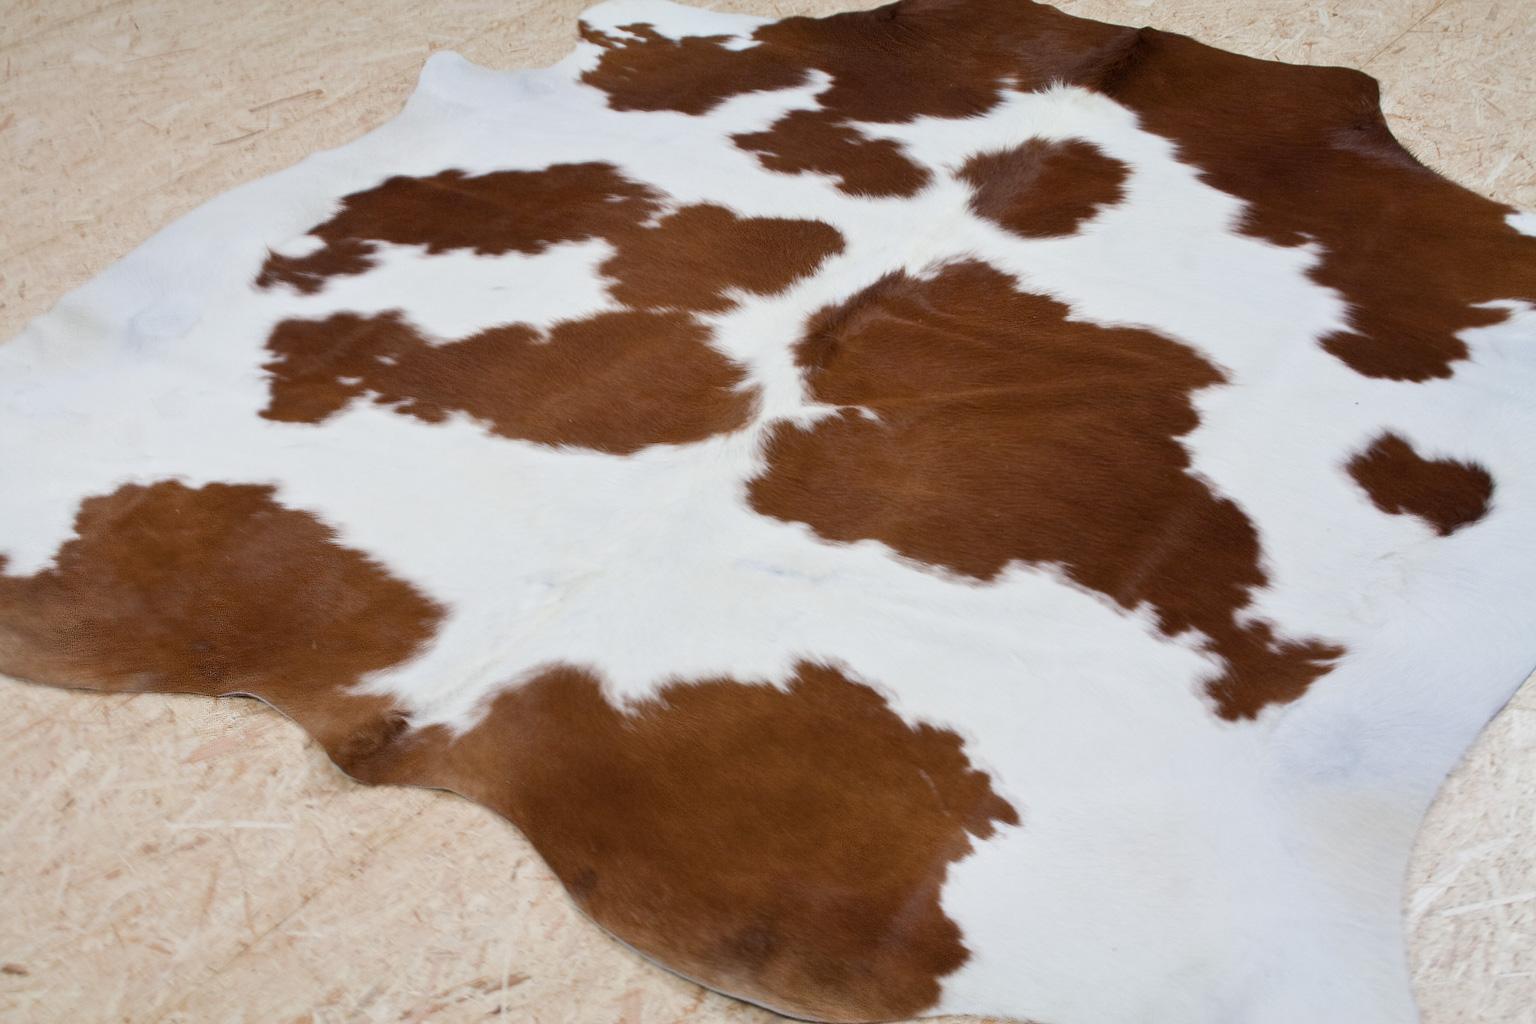 Organic Modern Natural White and Brown Cowhide or Rug, Dutch Cattle, 2018 1